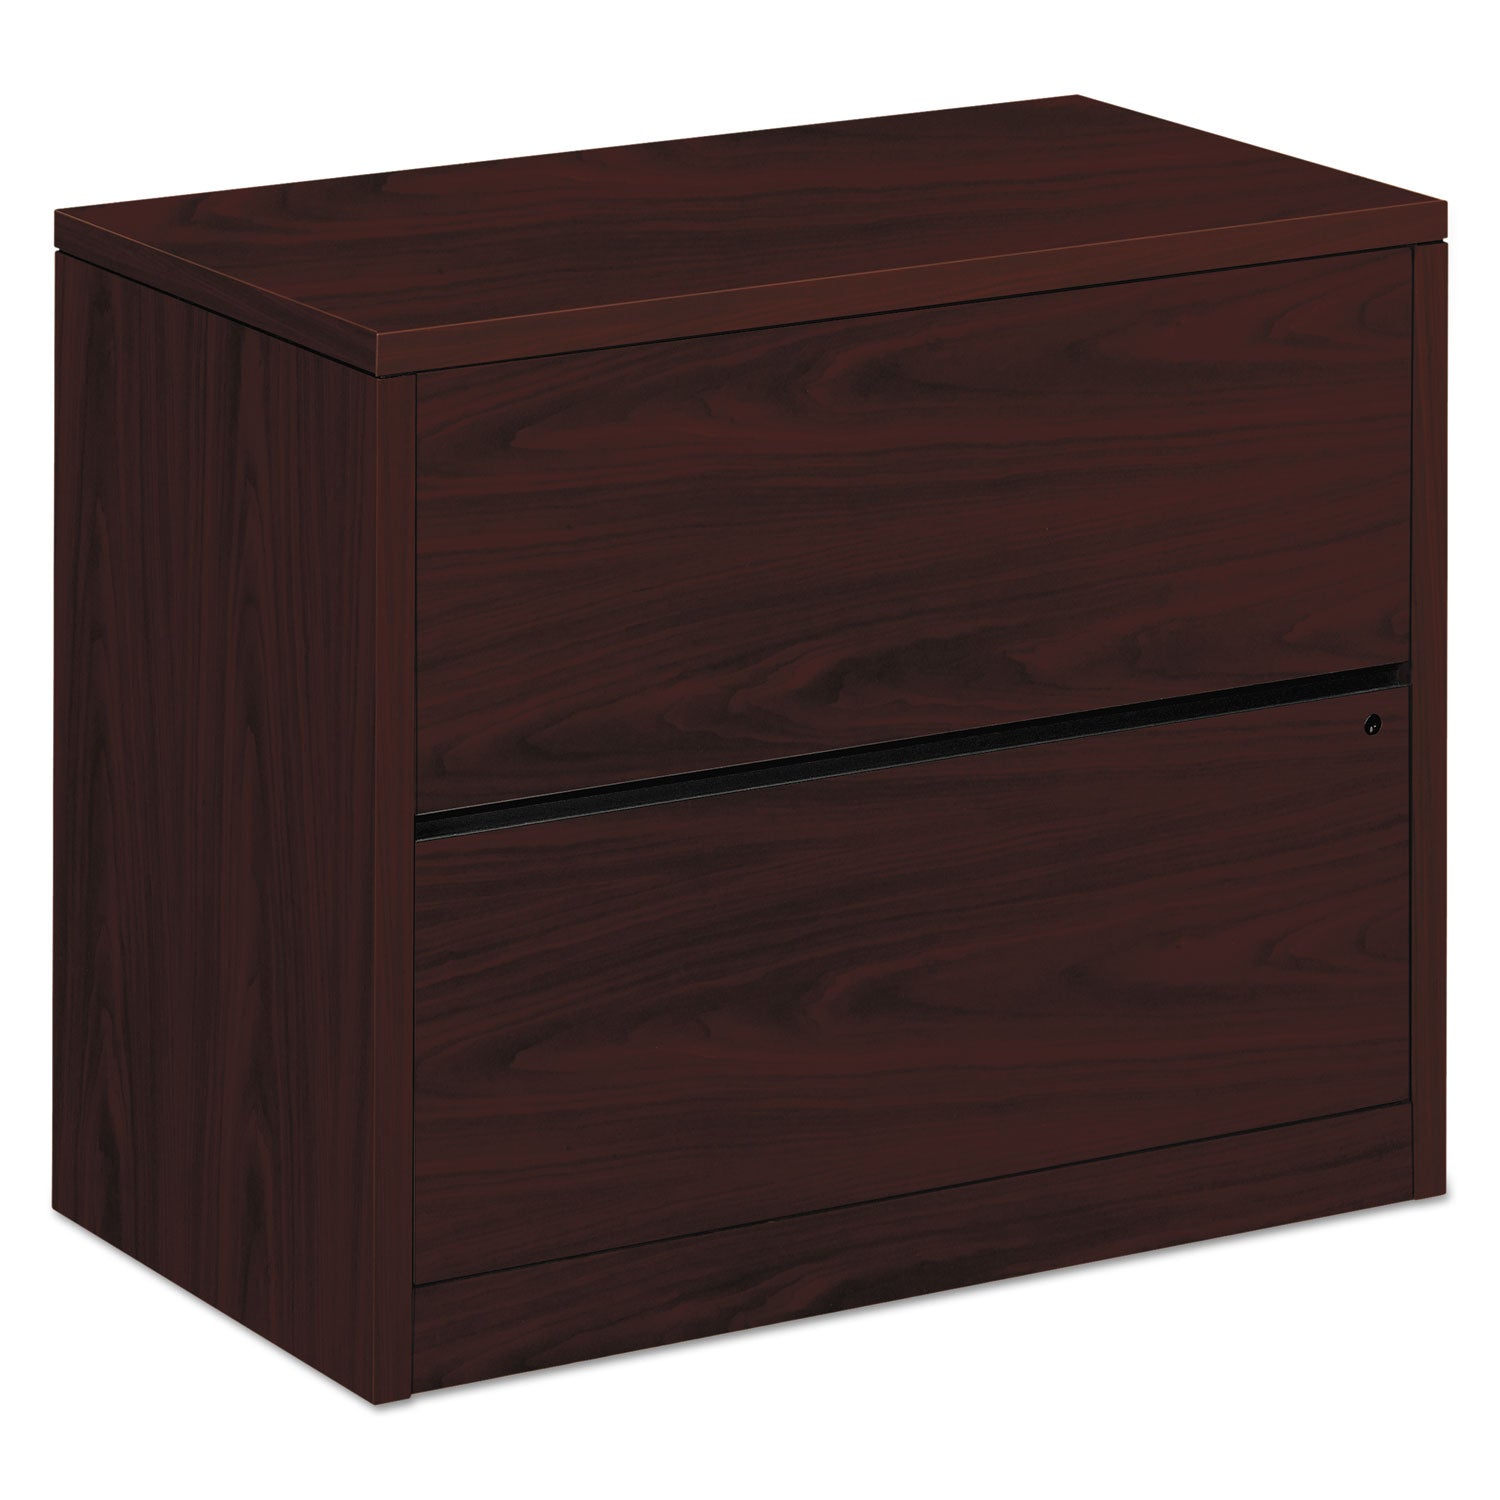 10500 Series Lateral File, 2 Legal/Letter-Size File Drawers, Mahogany, 36" x 20" x 29.5 - 